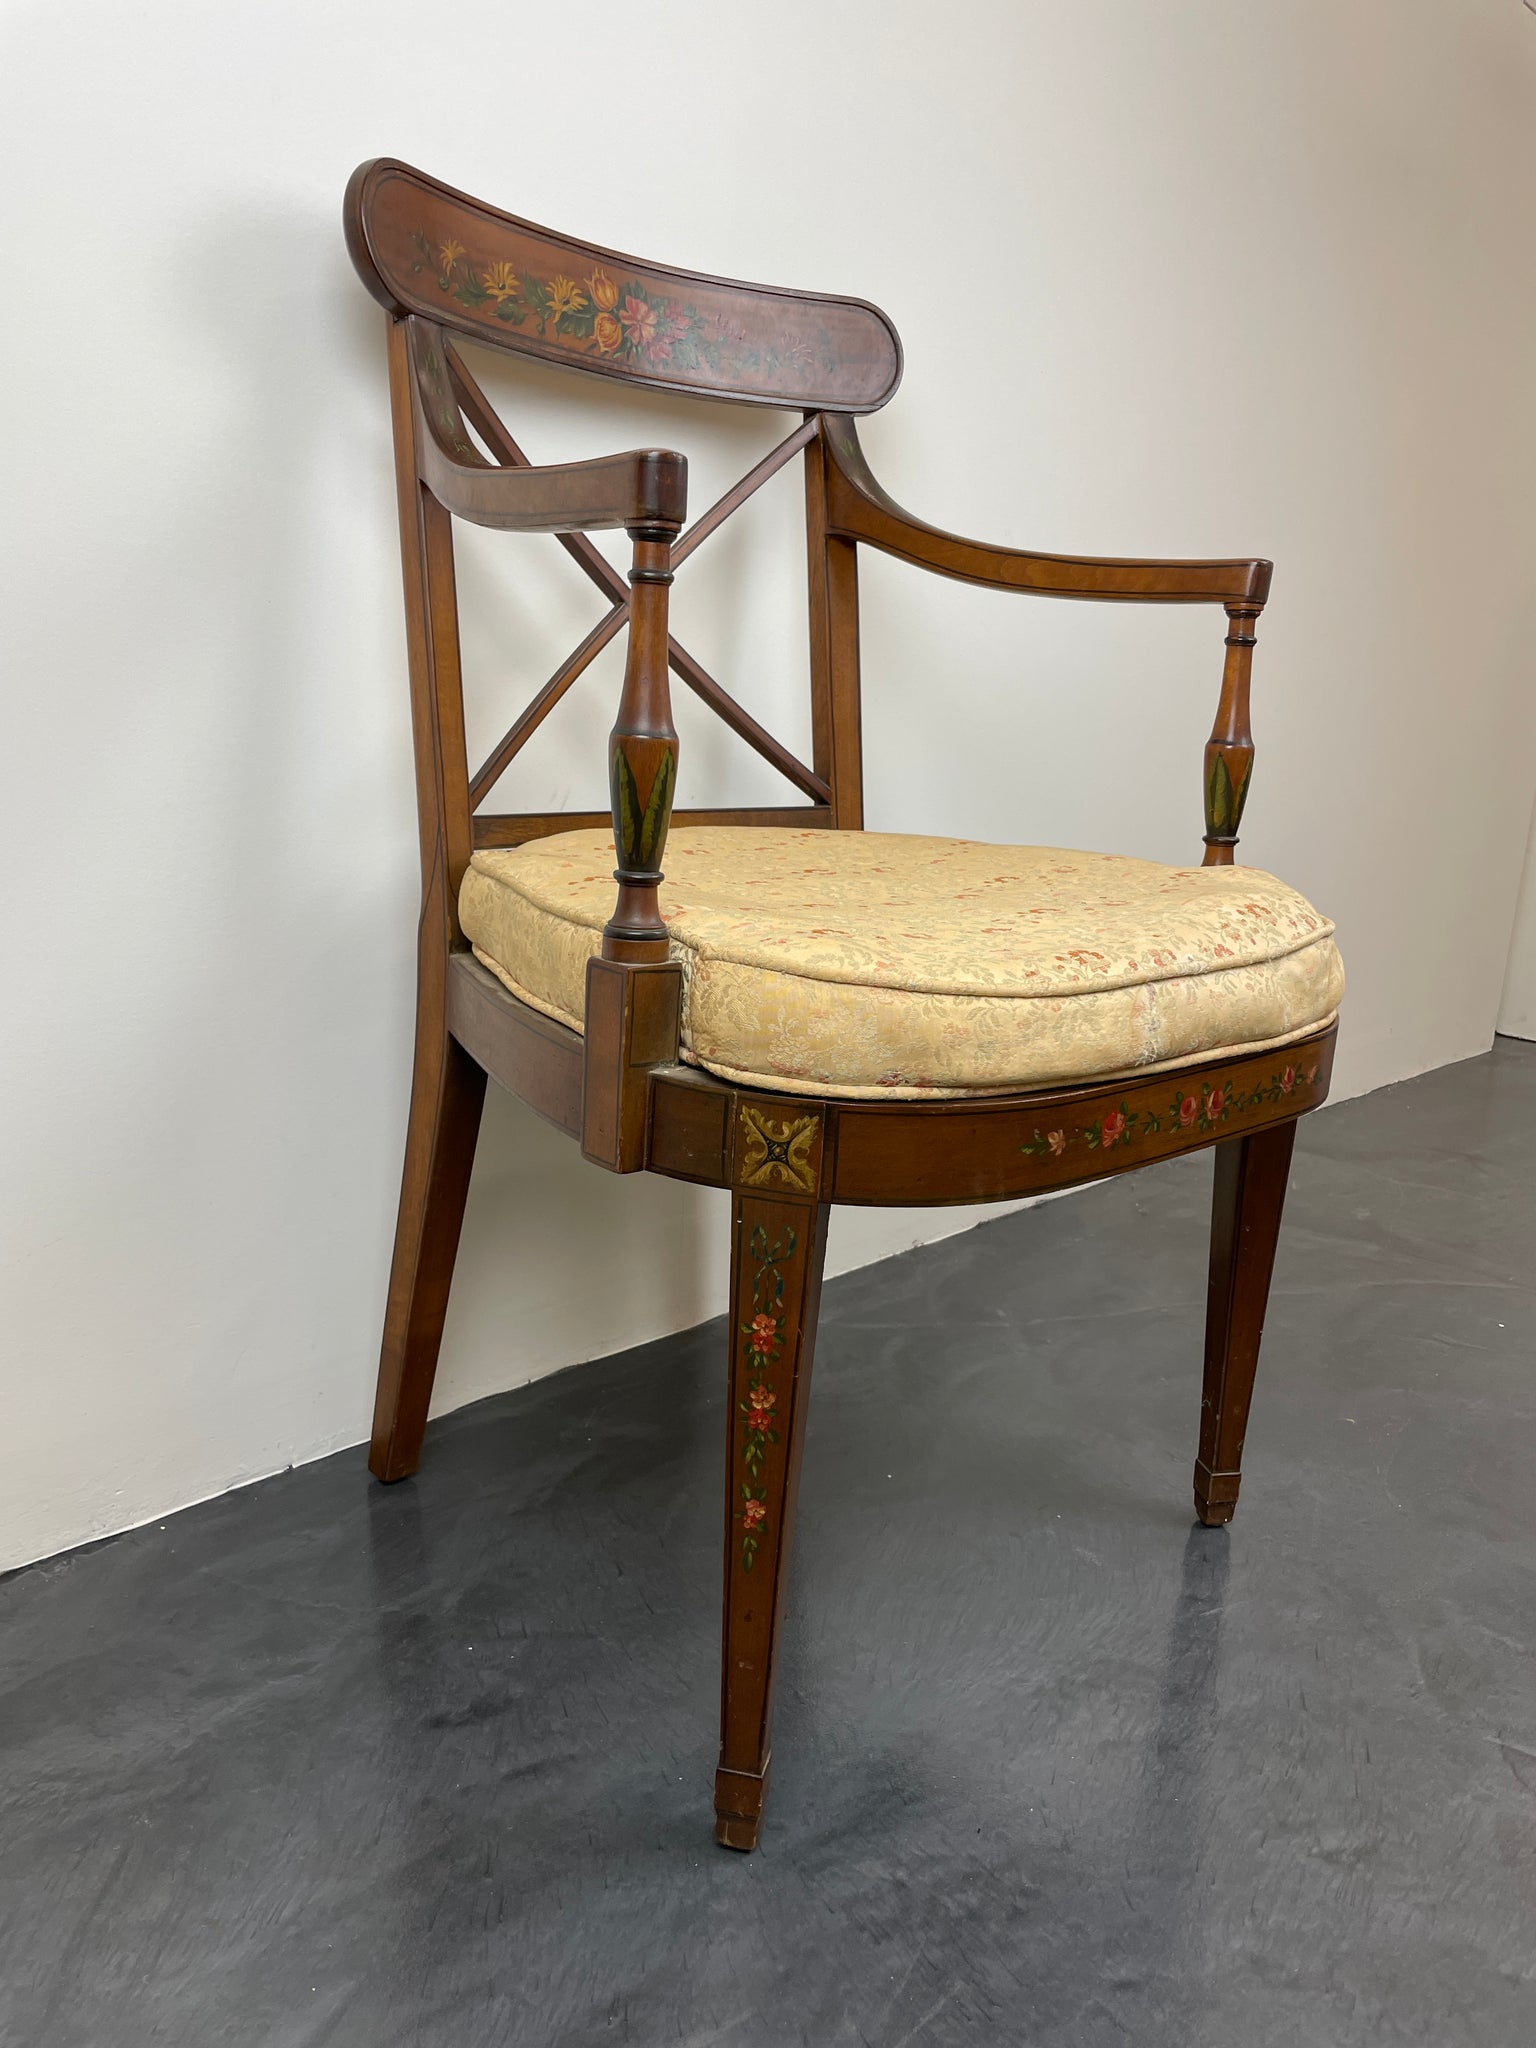 [Wallace Stevens]  Chair from the Wallace Stevens Collection, ca. 1930